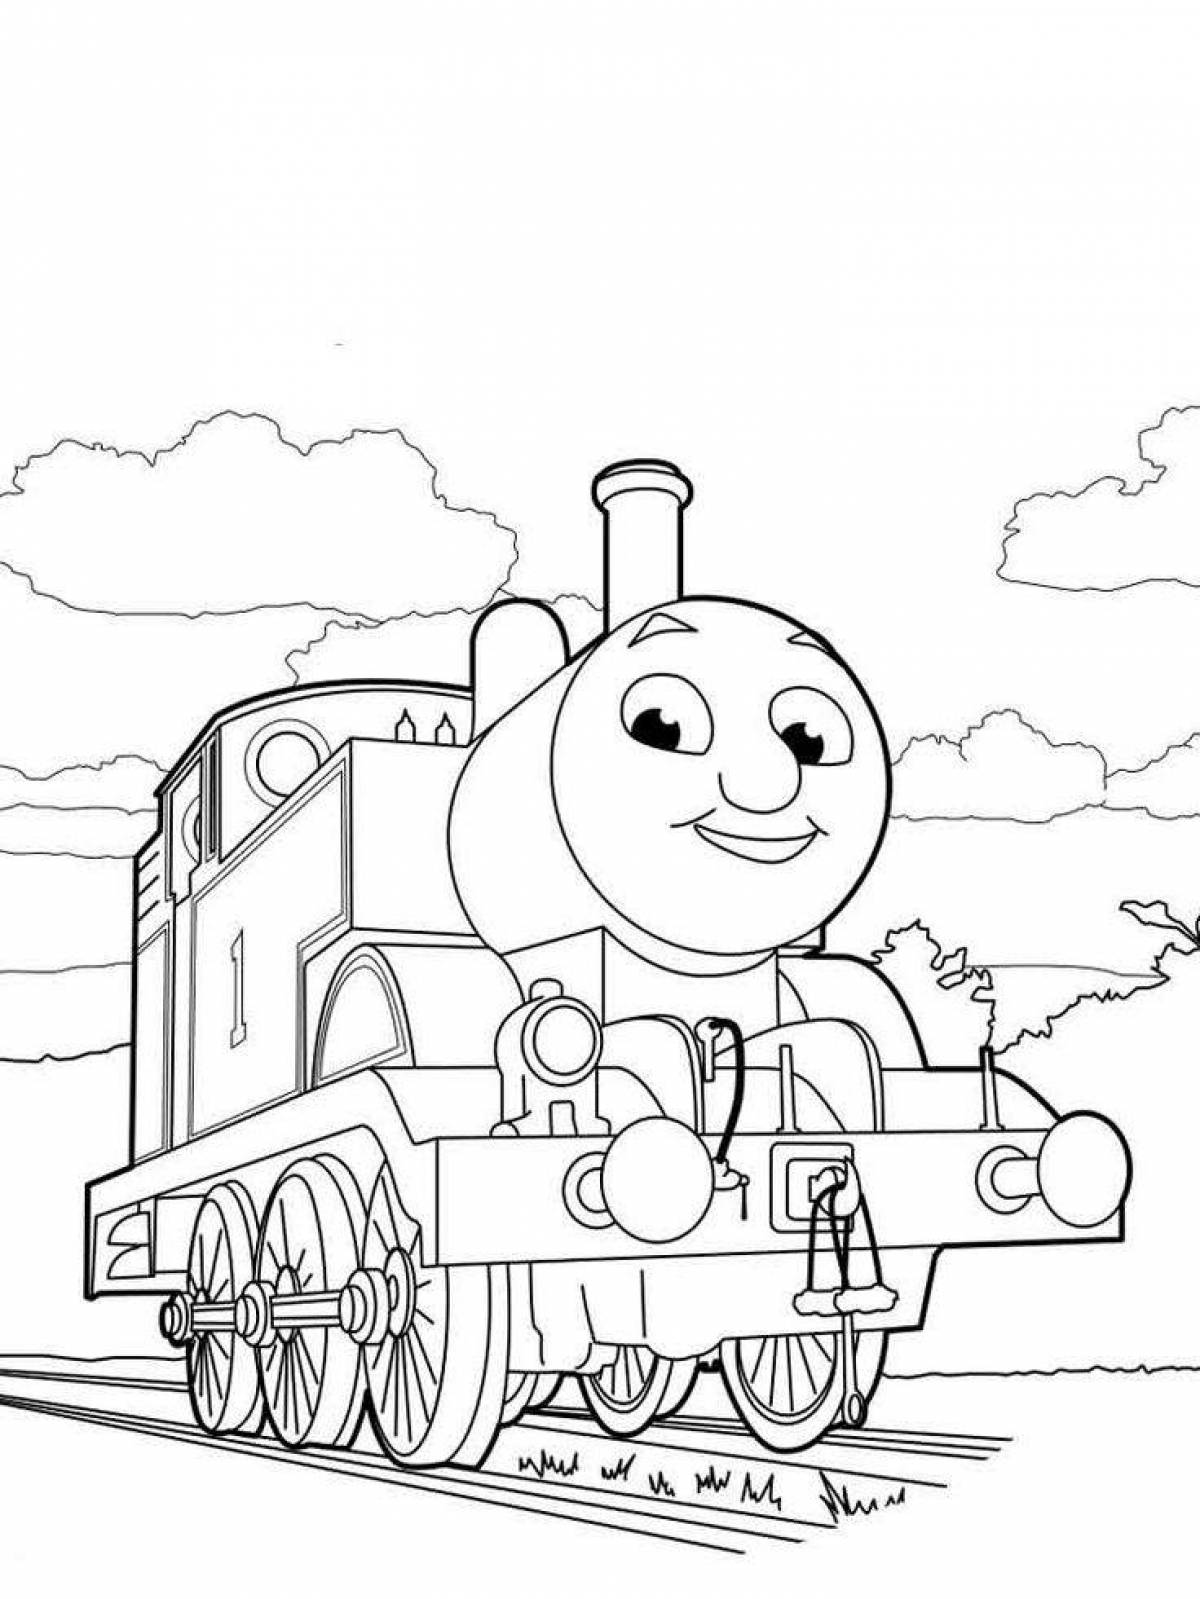 Coloring the amazing thomas the tank engine